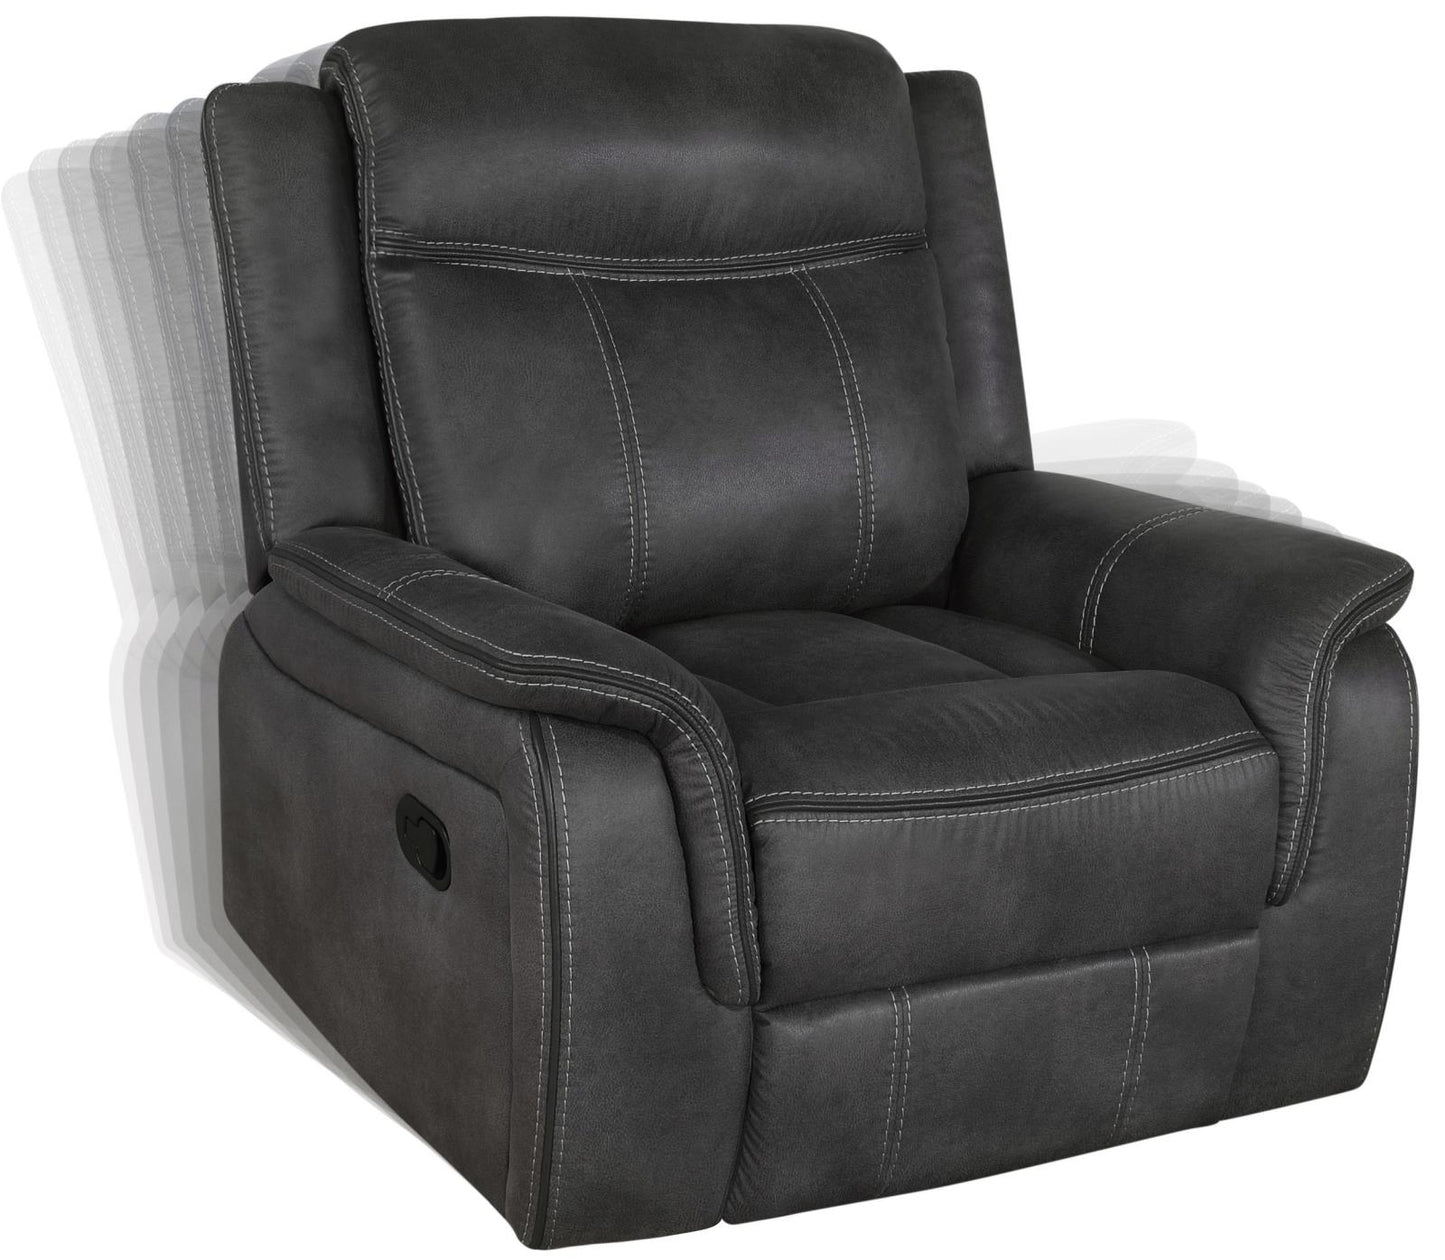 Lawrence - GLIDER RECLINER